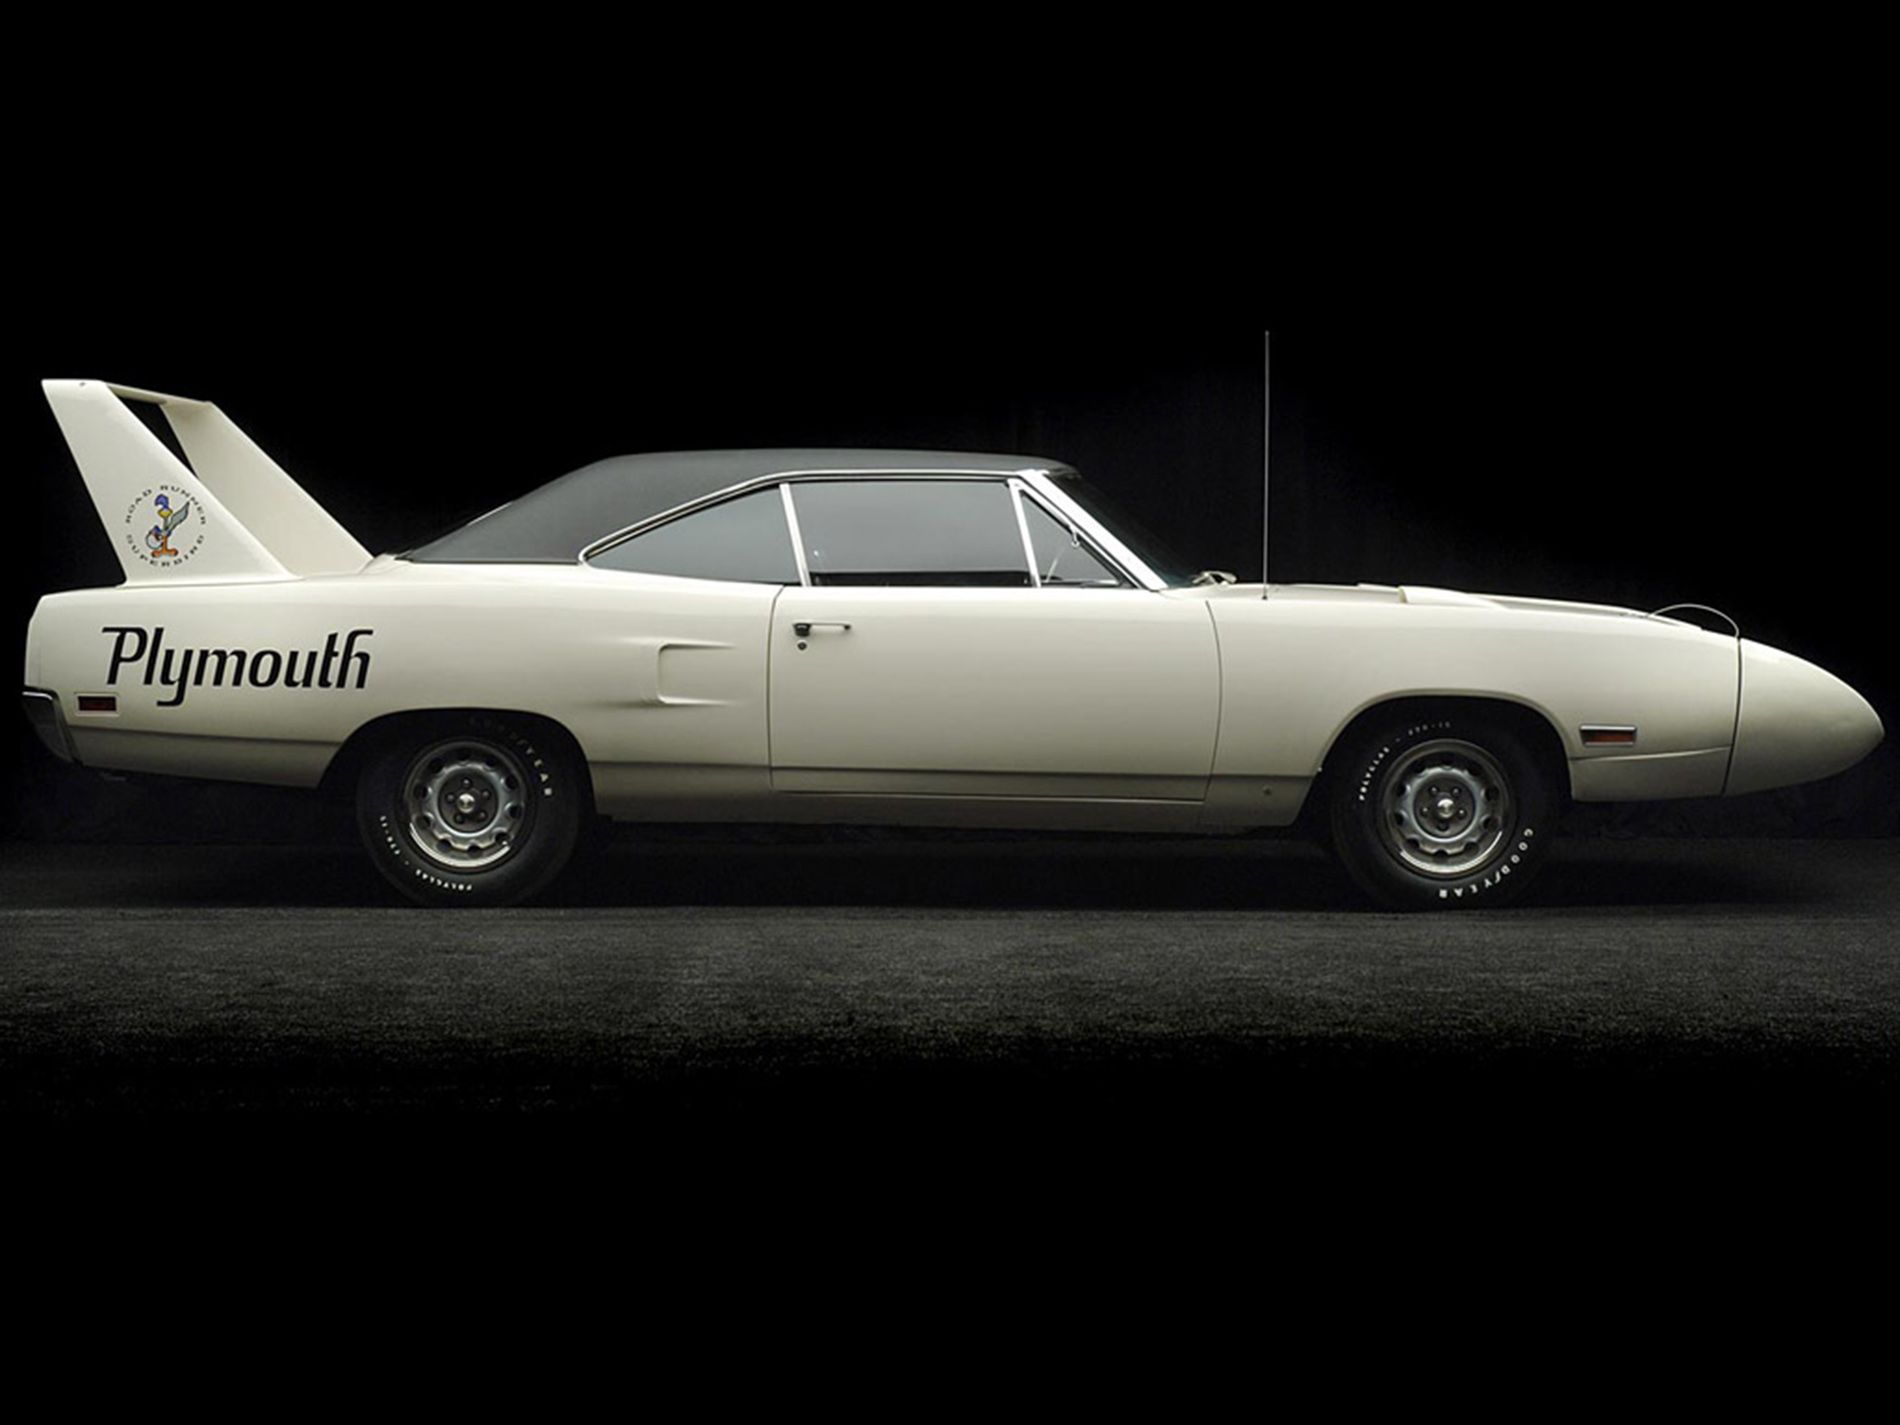 Plymouth Superbird muscle car